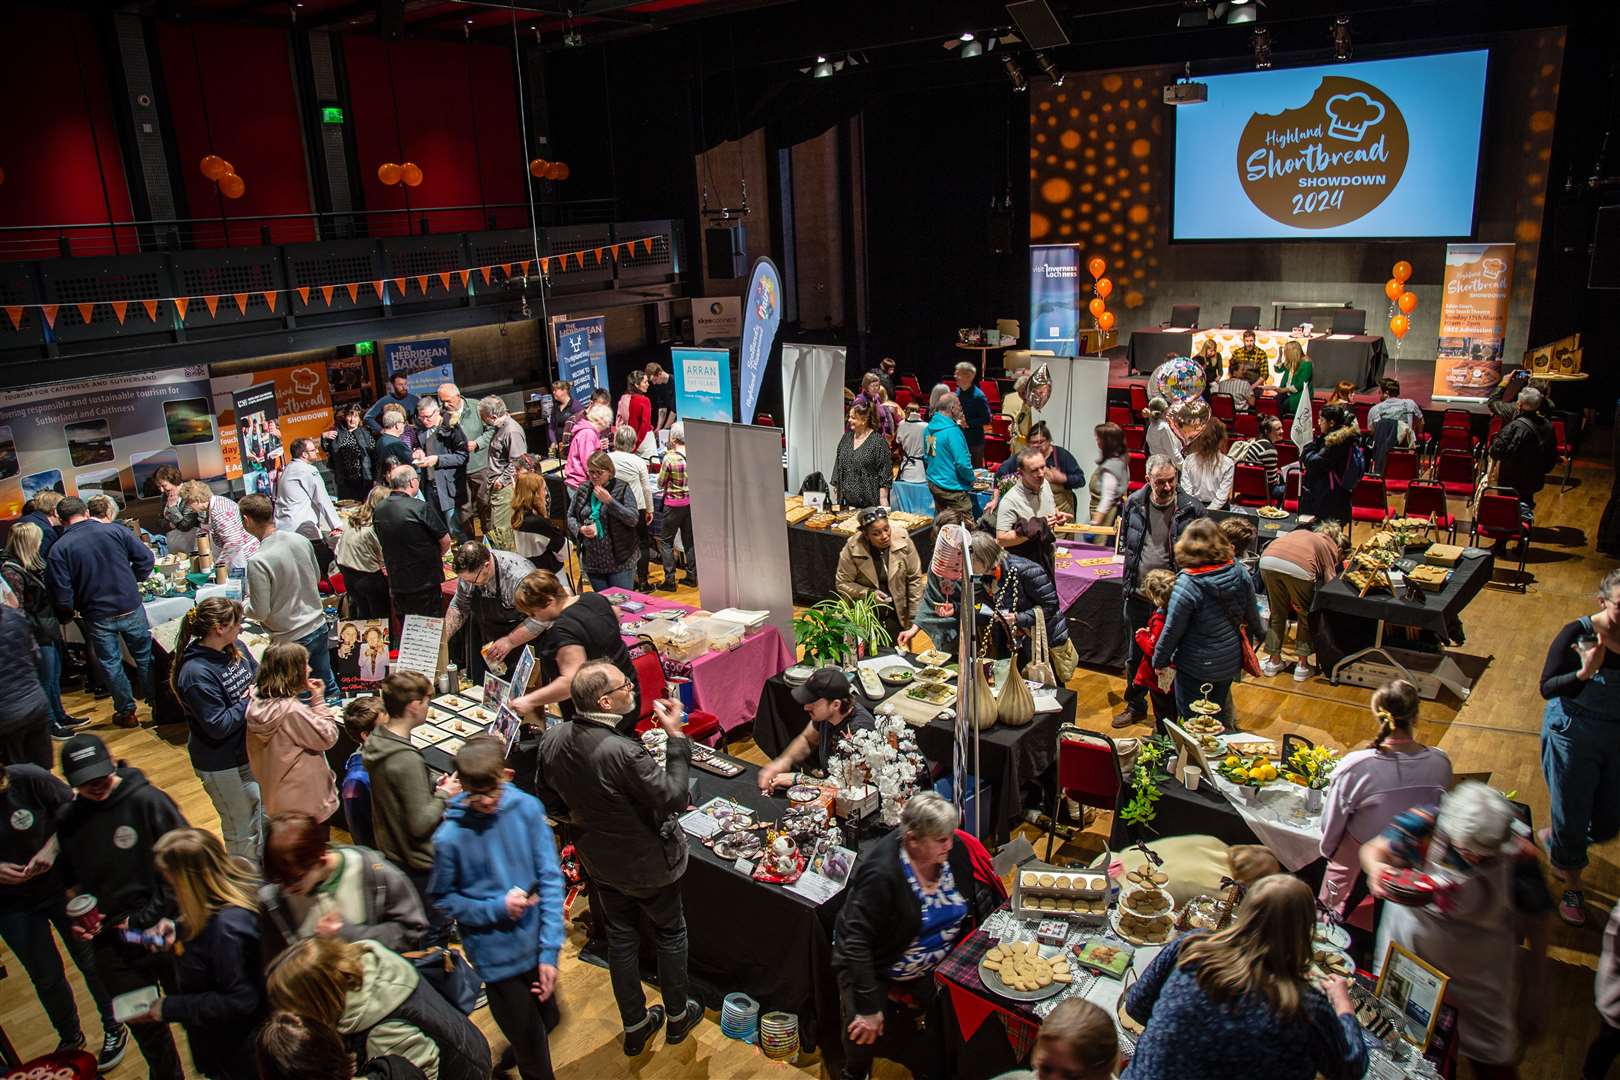 A packed Eden Court where the stage was set for the Highland Shortbread Showdown. Photo: Craig Dutton